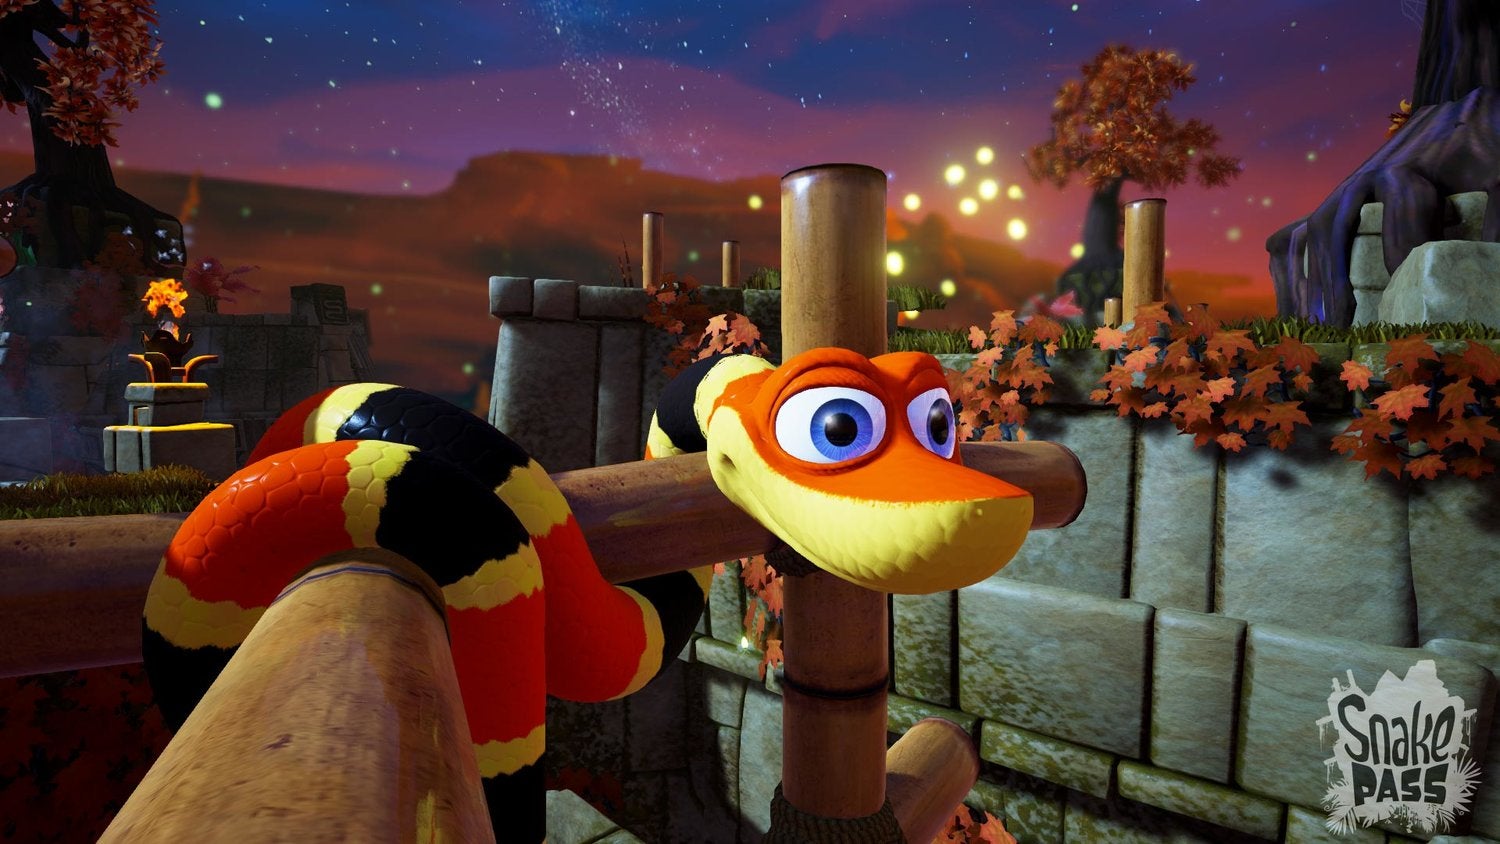 Image for Nintendo Switch Snake Pass has Confounding Controls, but is Still Really Fun